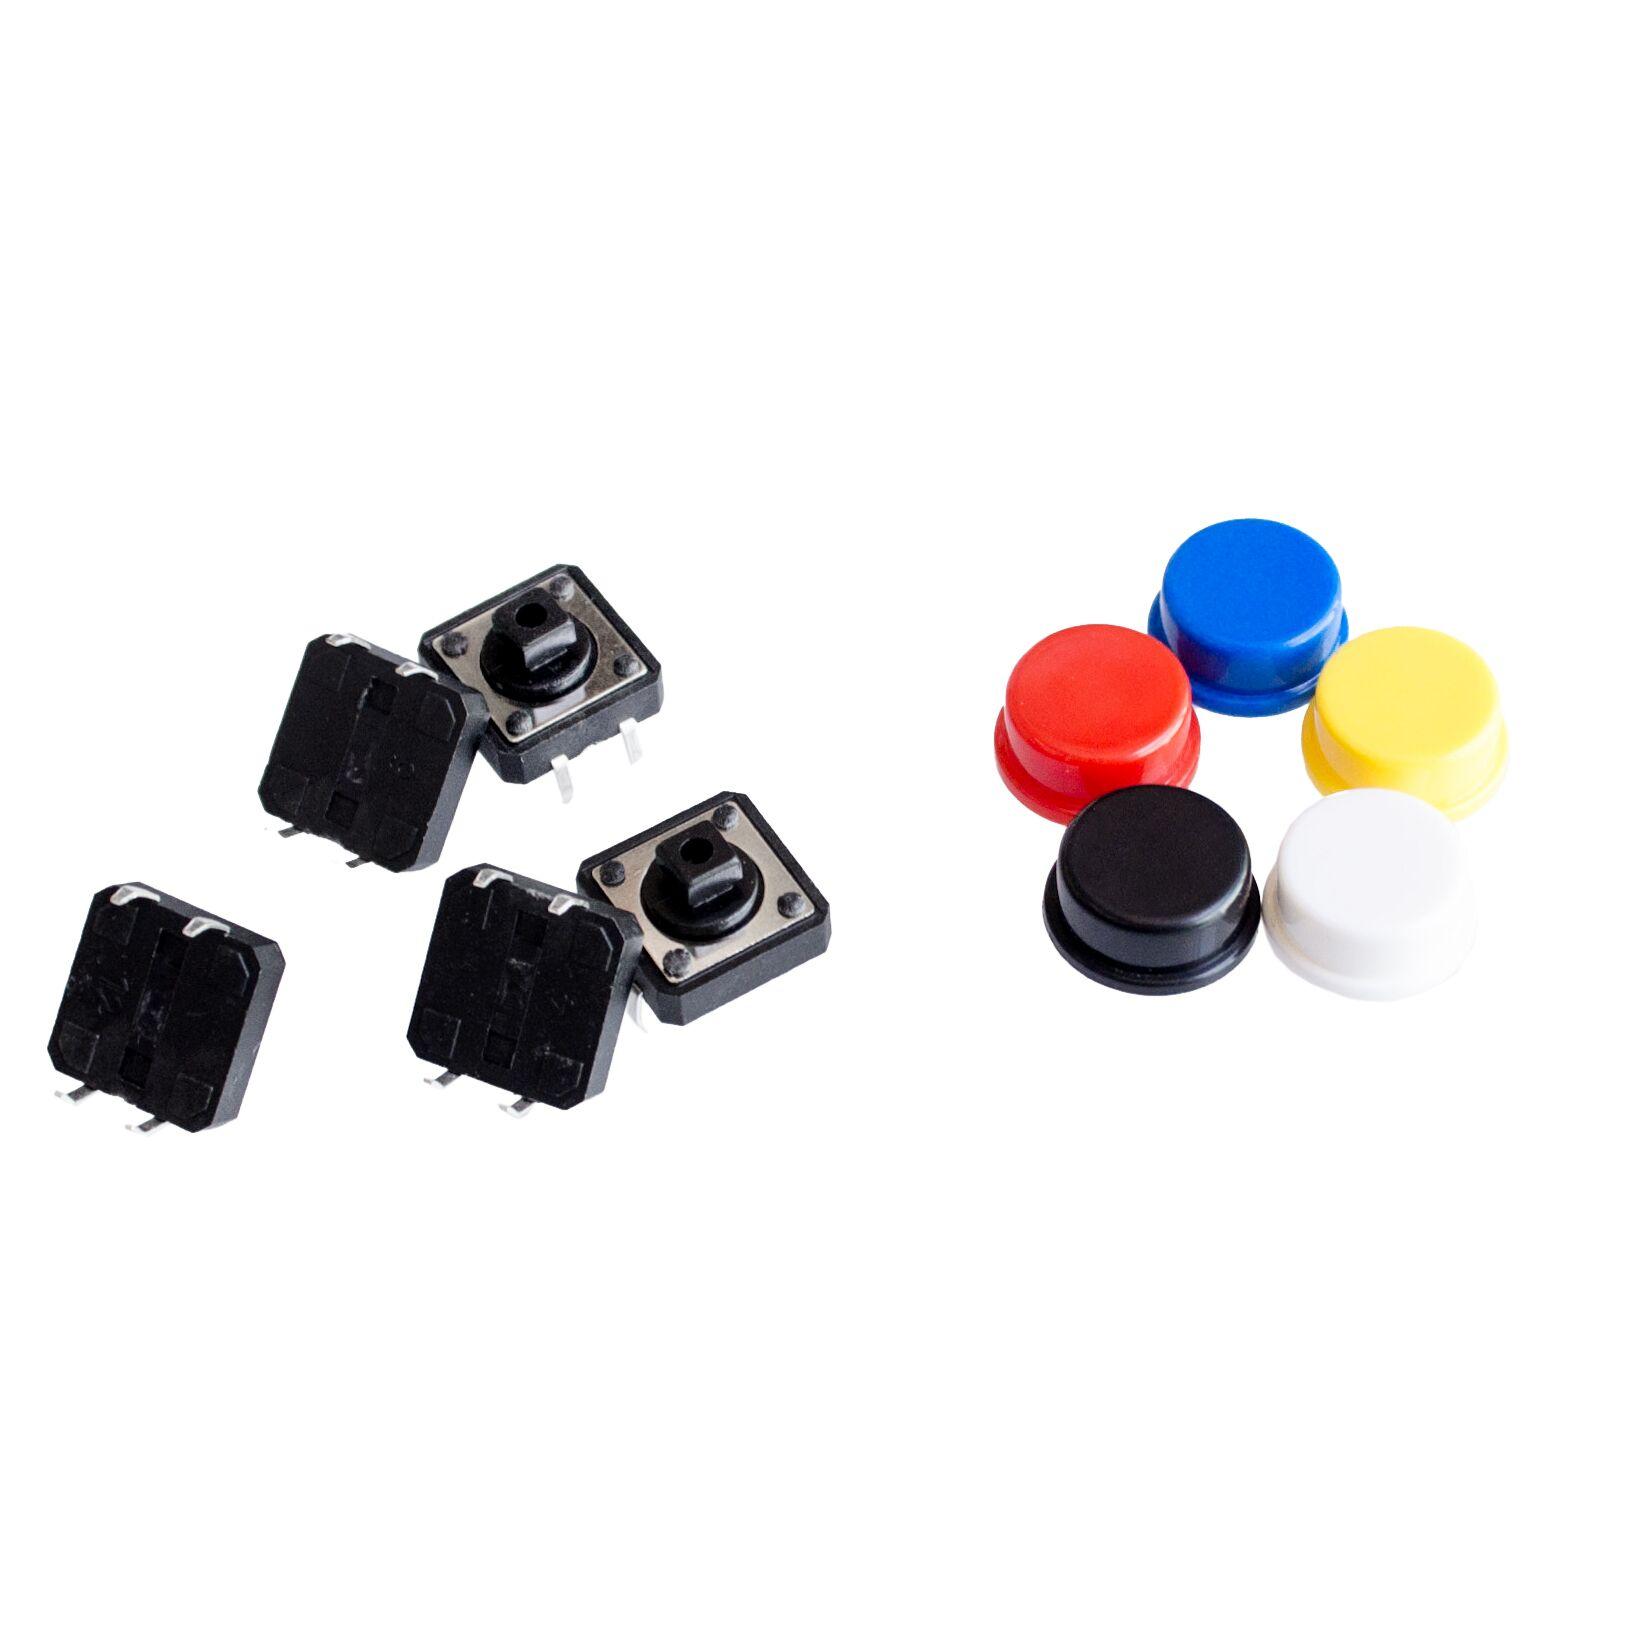 20SETS-LOT-12X12MM-Big-key-module-Big-button-module-Light-touch-switch-module-with-hat-High-level-output-for-arduino-usb